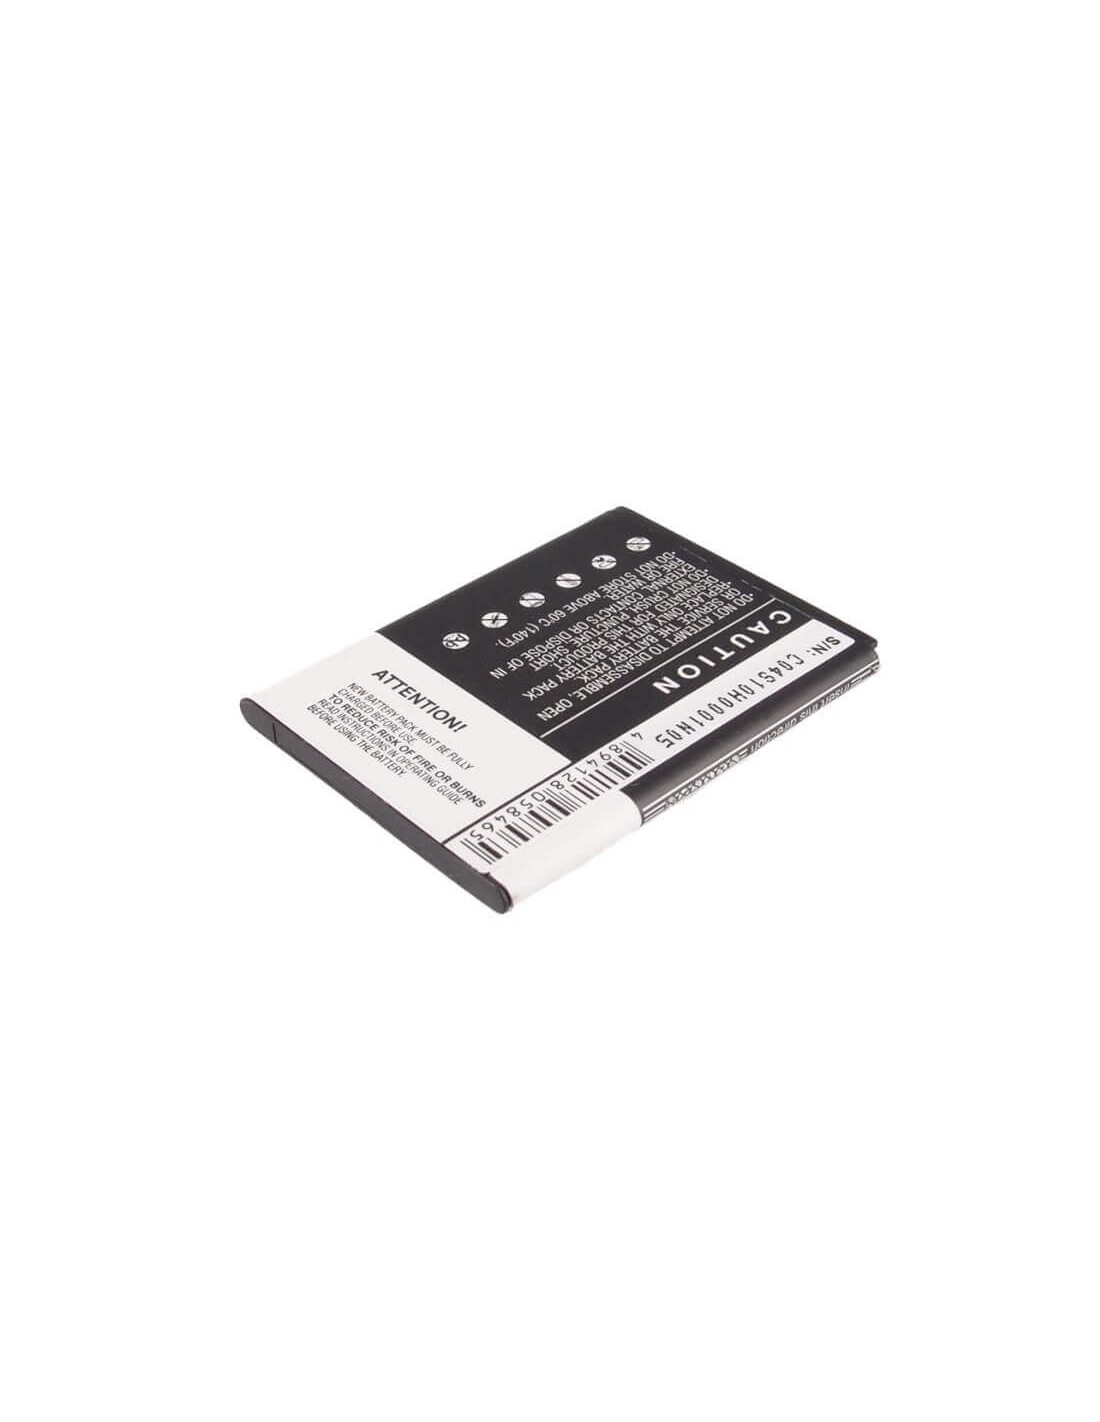 Battery for Samsung GT-S5360, Galaxy Y, GT-S5380 3.7V, 1350mAh - 5.00Wh